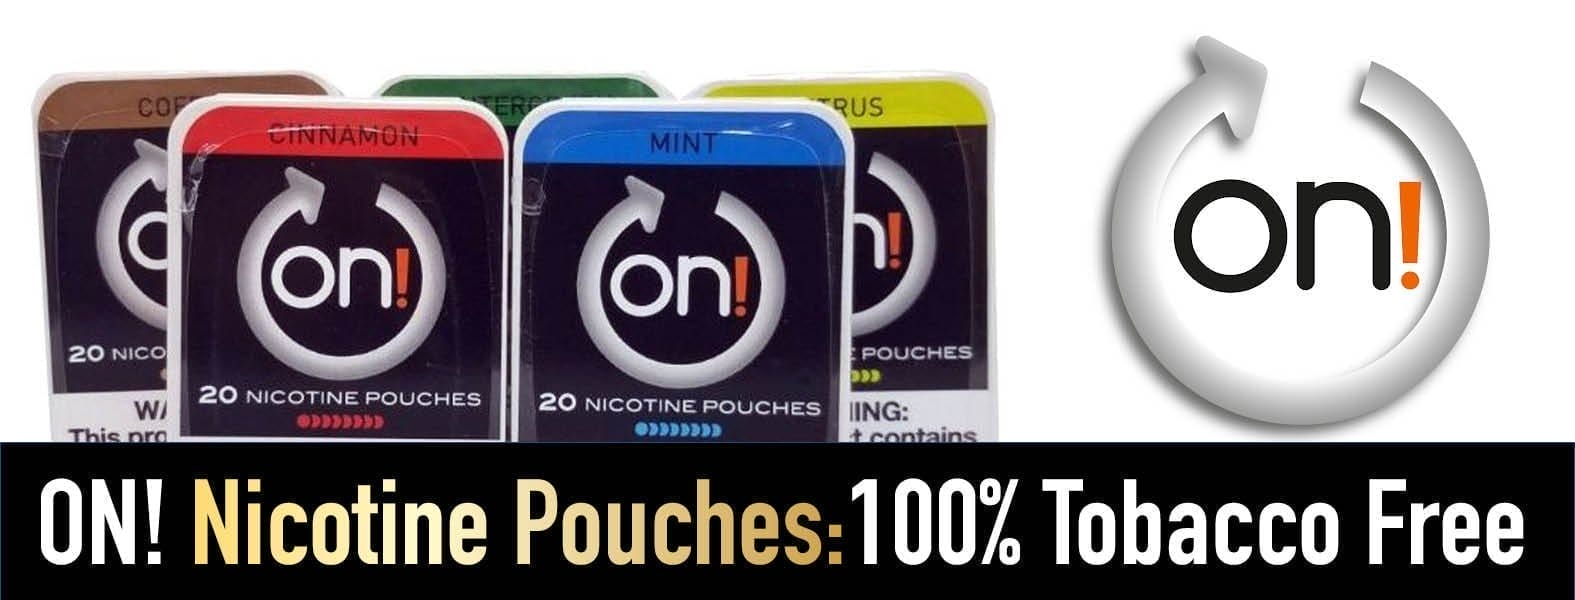 on! Nicotine Pouches are 100% Tobacco free